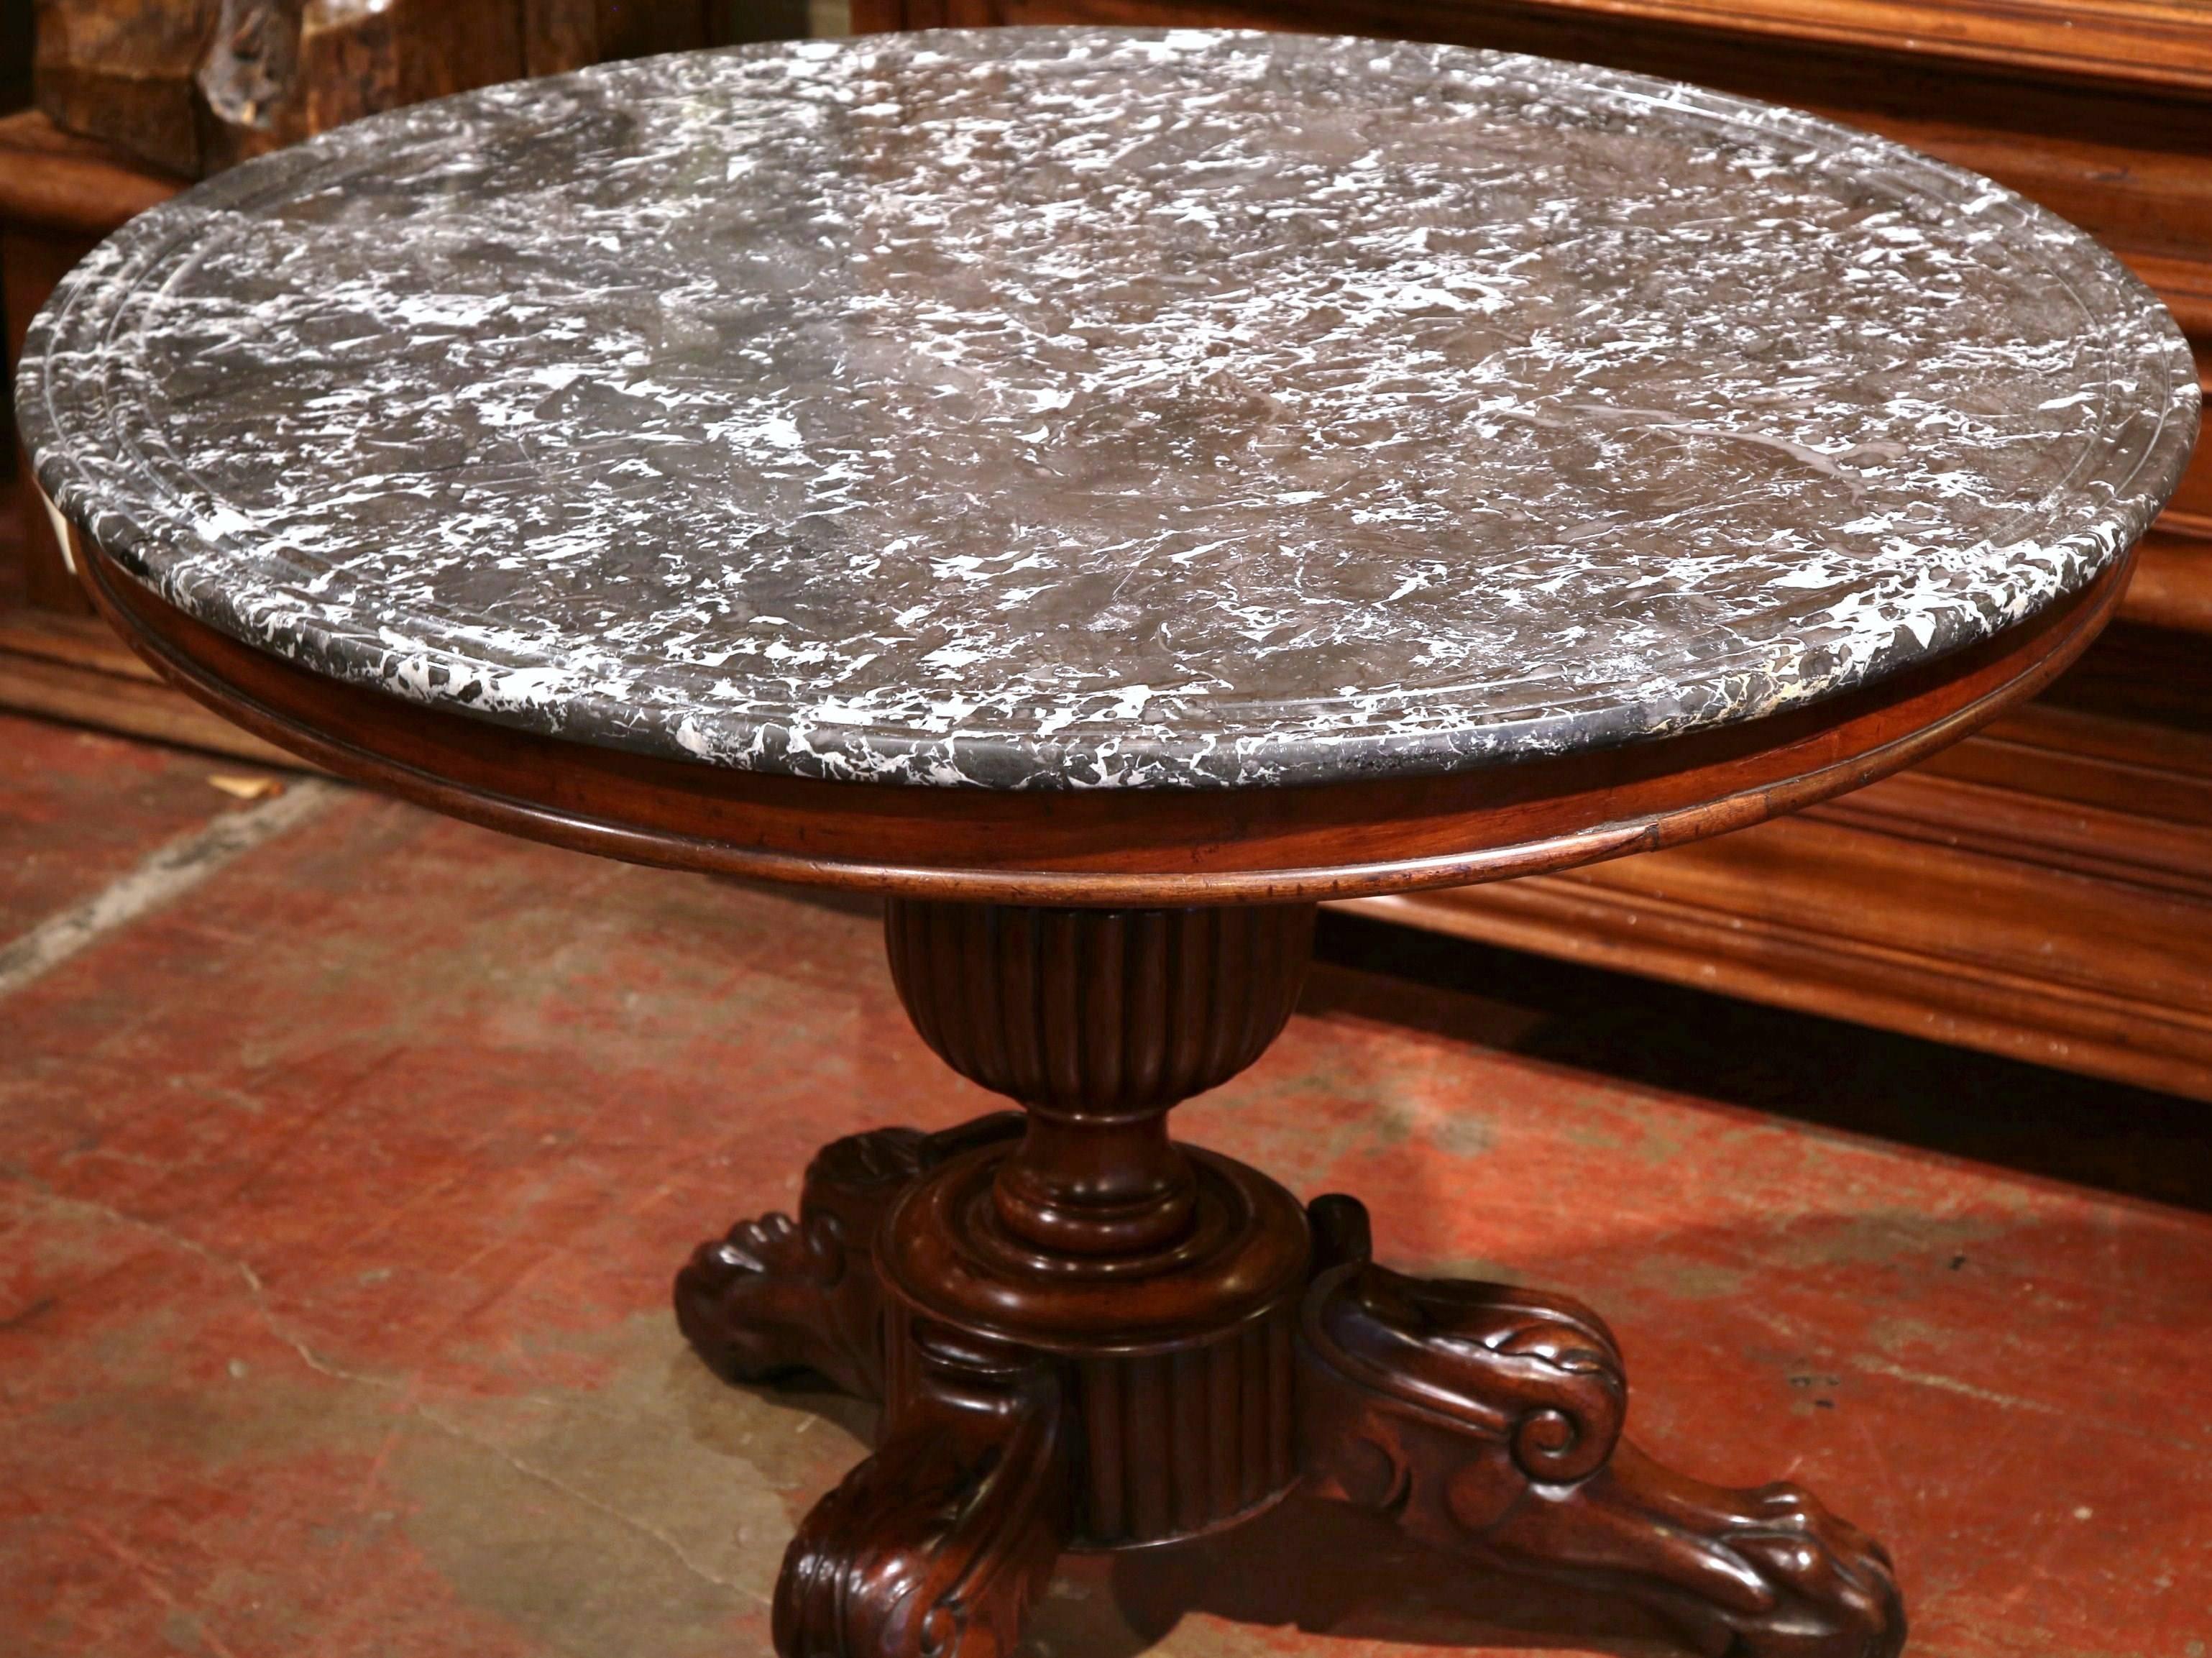 Complete your entry or breakfast nook with this beautifully carved, round pedestal table. Crafted in France, circa 1870, this table has a gray marble top supported by a large, reeded hand carved urn column. The table rests on three carved legs with